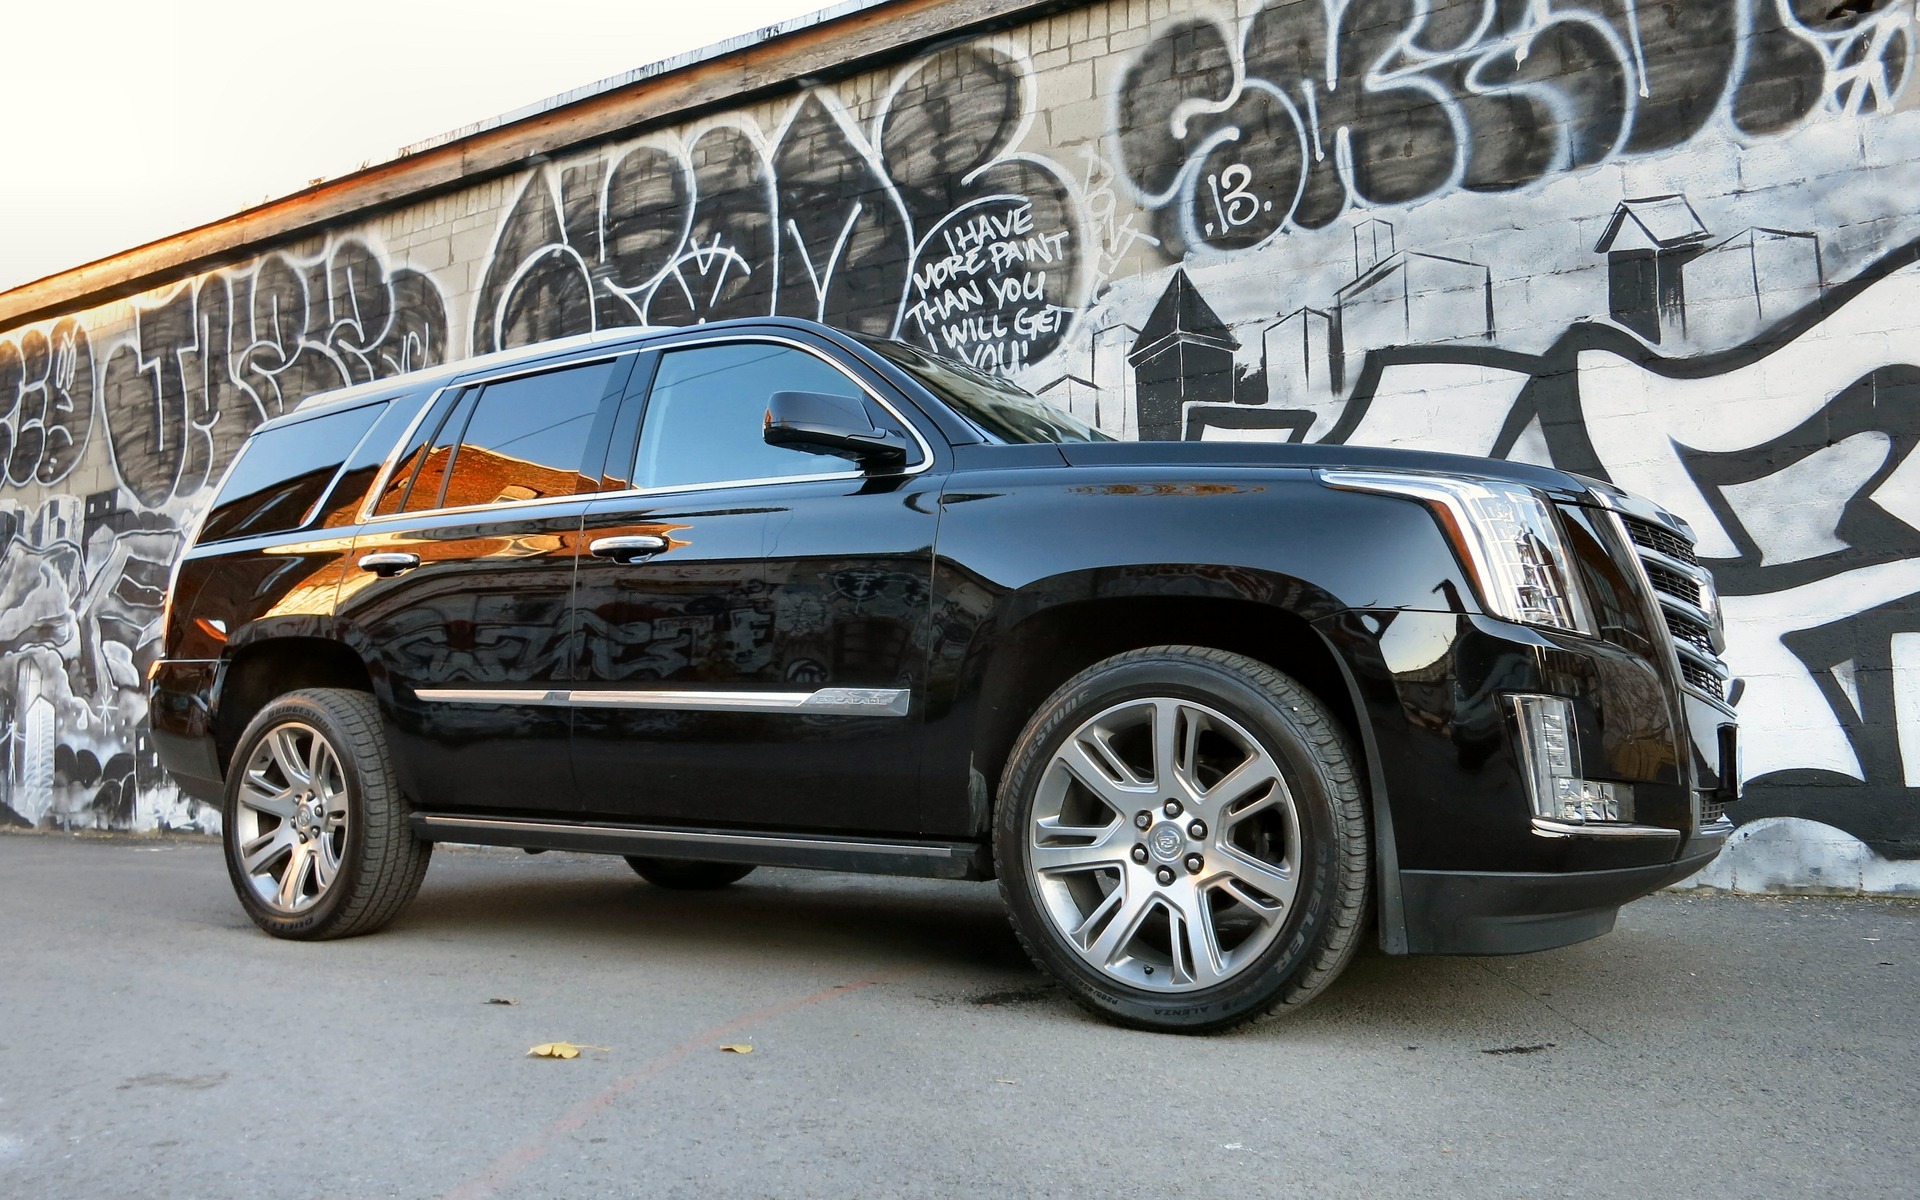  There's a Sport and a Tour setting for the Escalade's suspension.